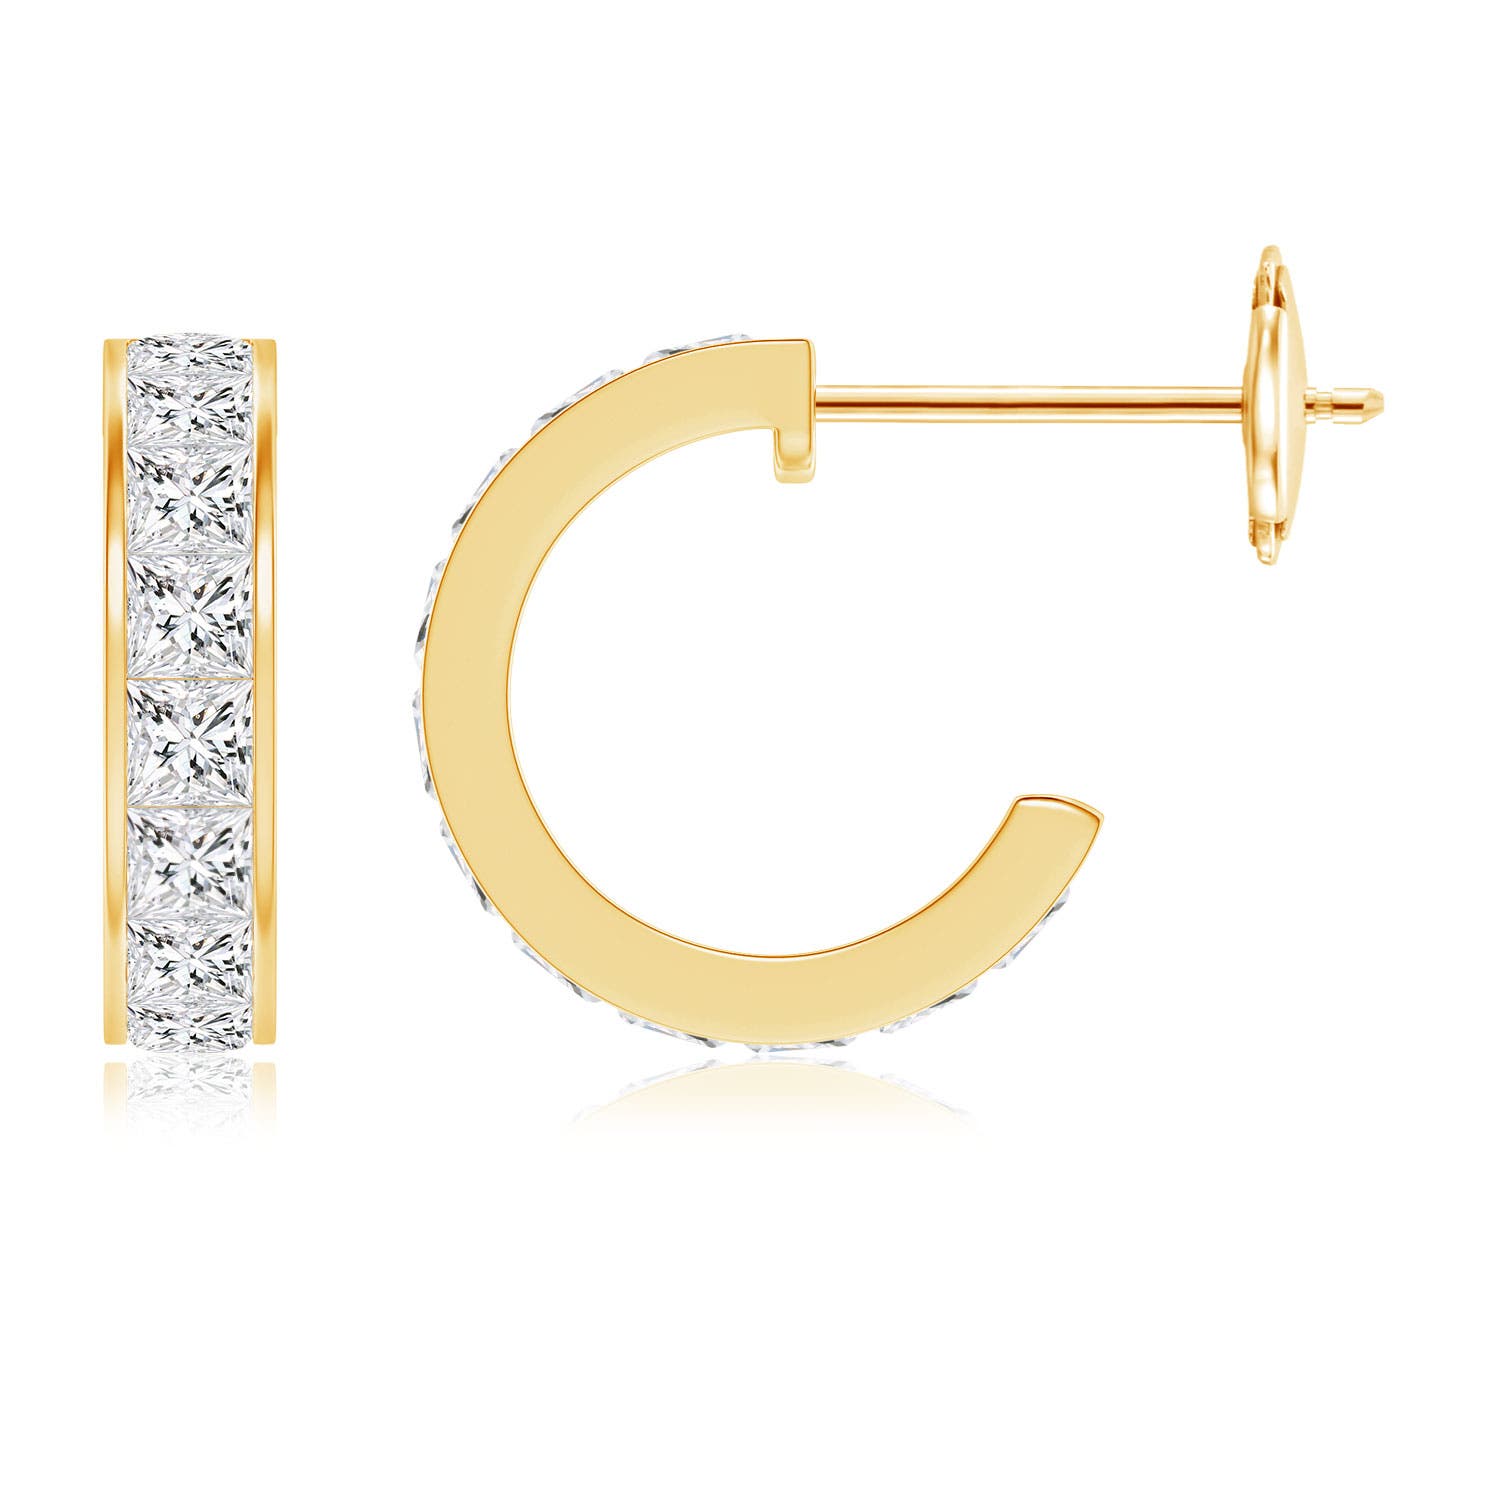 H, SI2 / 1.1 CT / 14 KT Yellow Gold